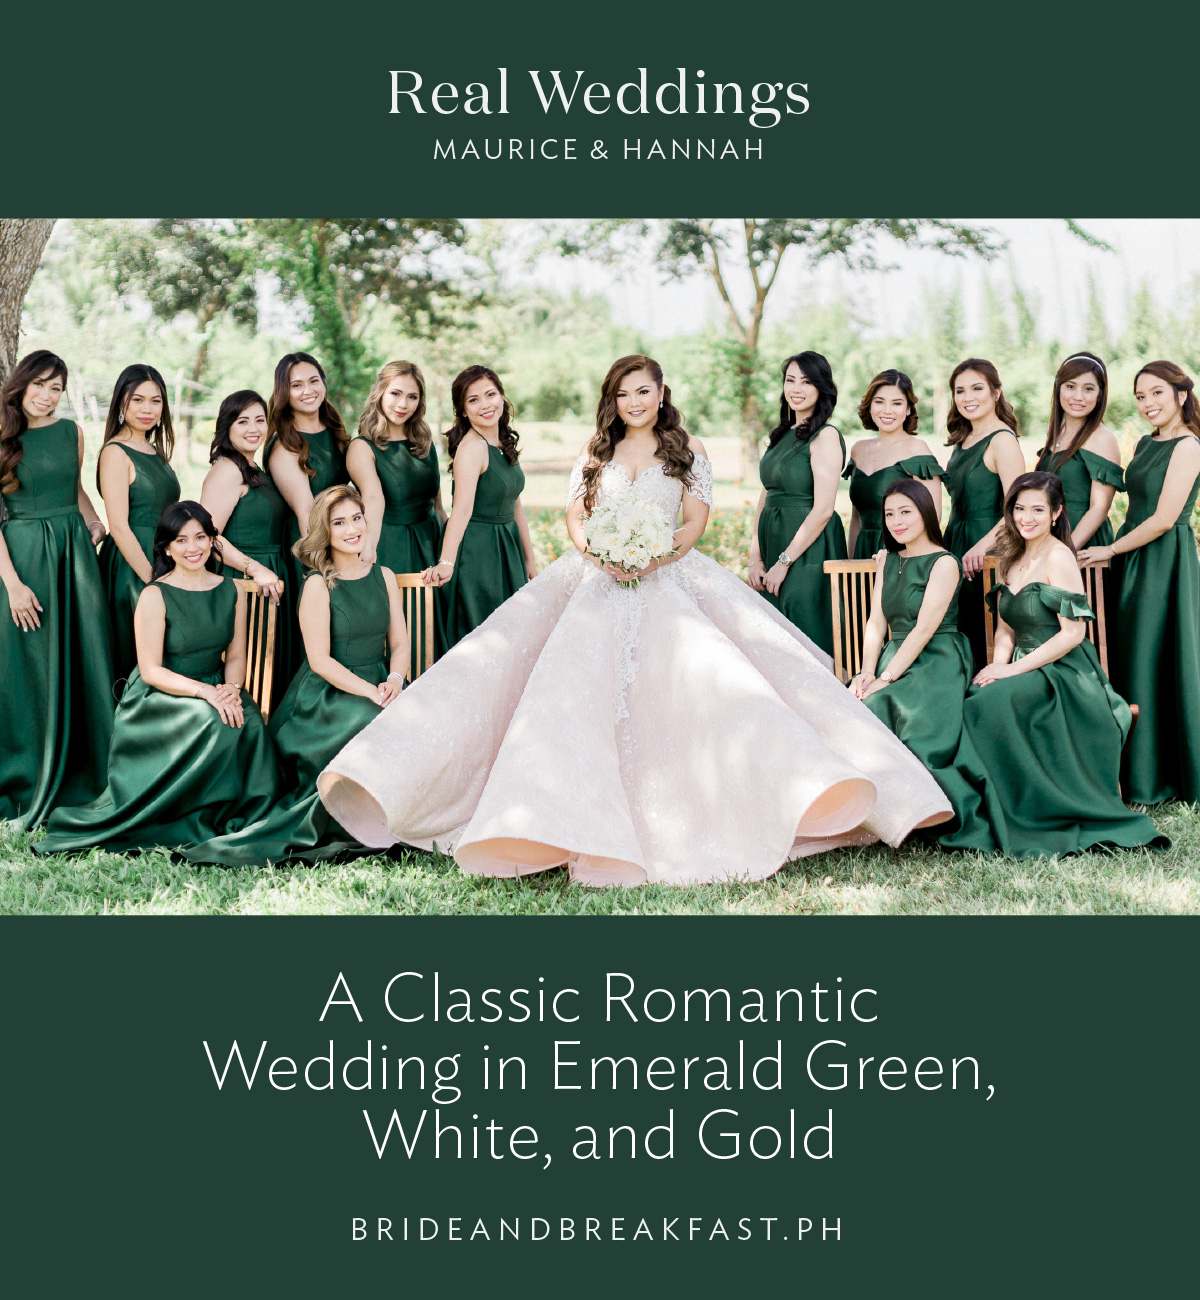 A Classic Romantic Wedding in Emerald Green, White, and Gold